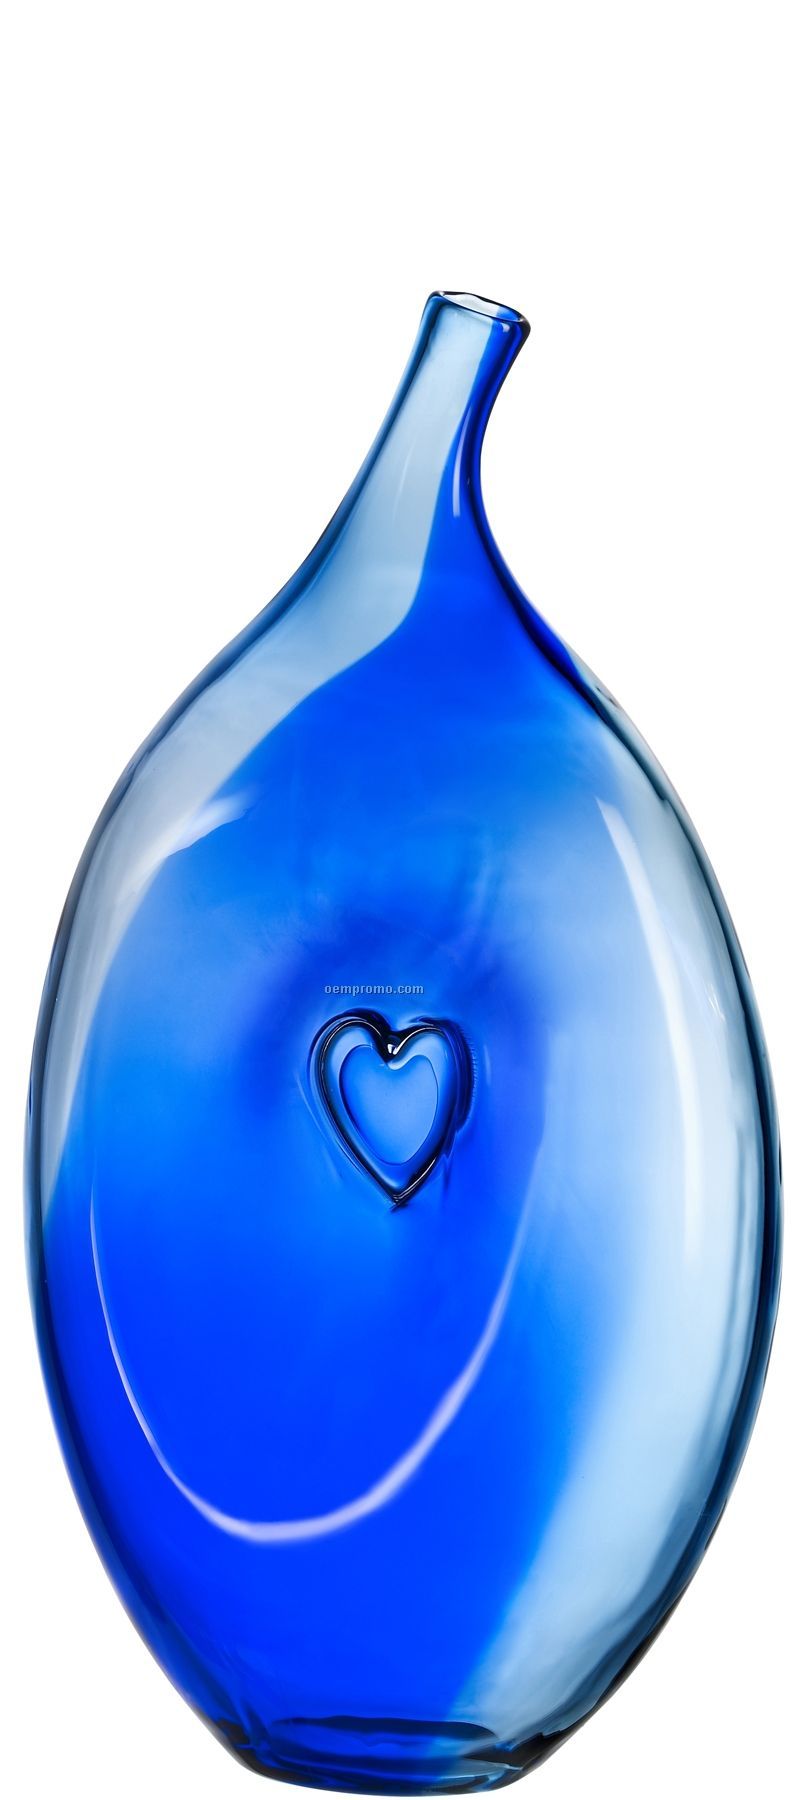 Bali Oval Glass Vase With Heart Inset By Kjell Engman